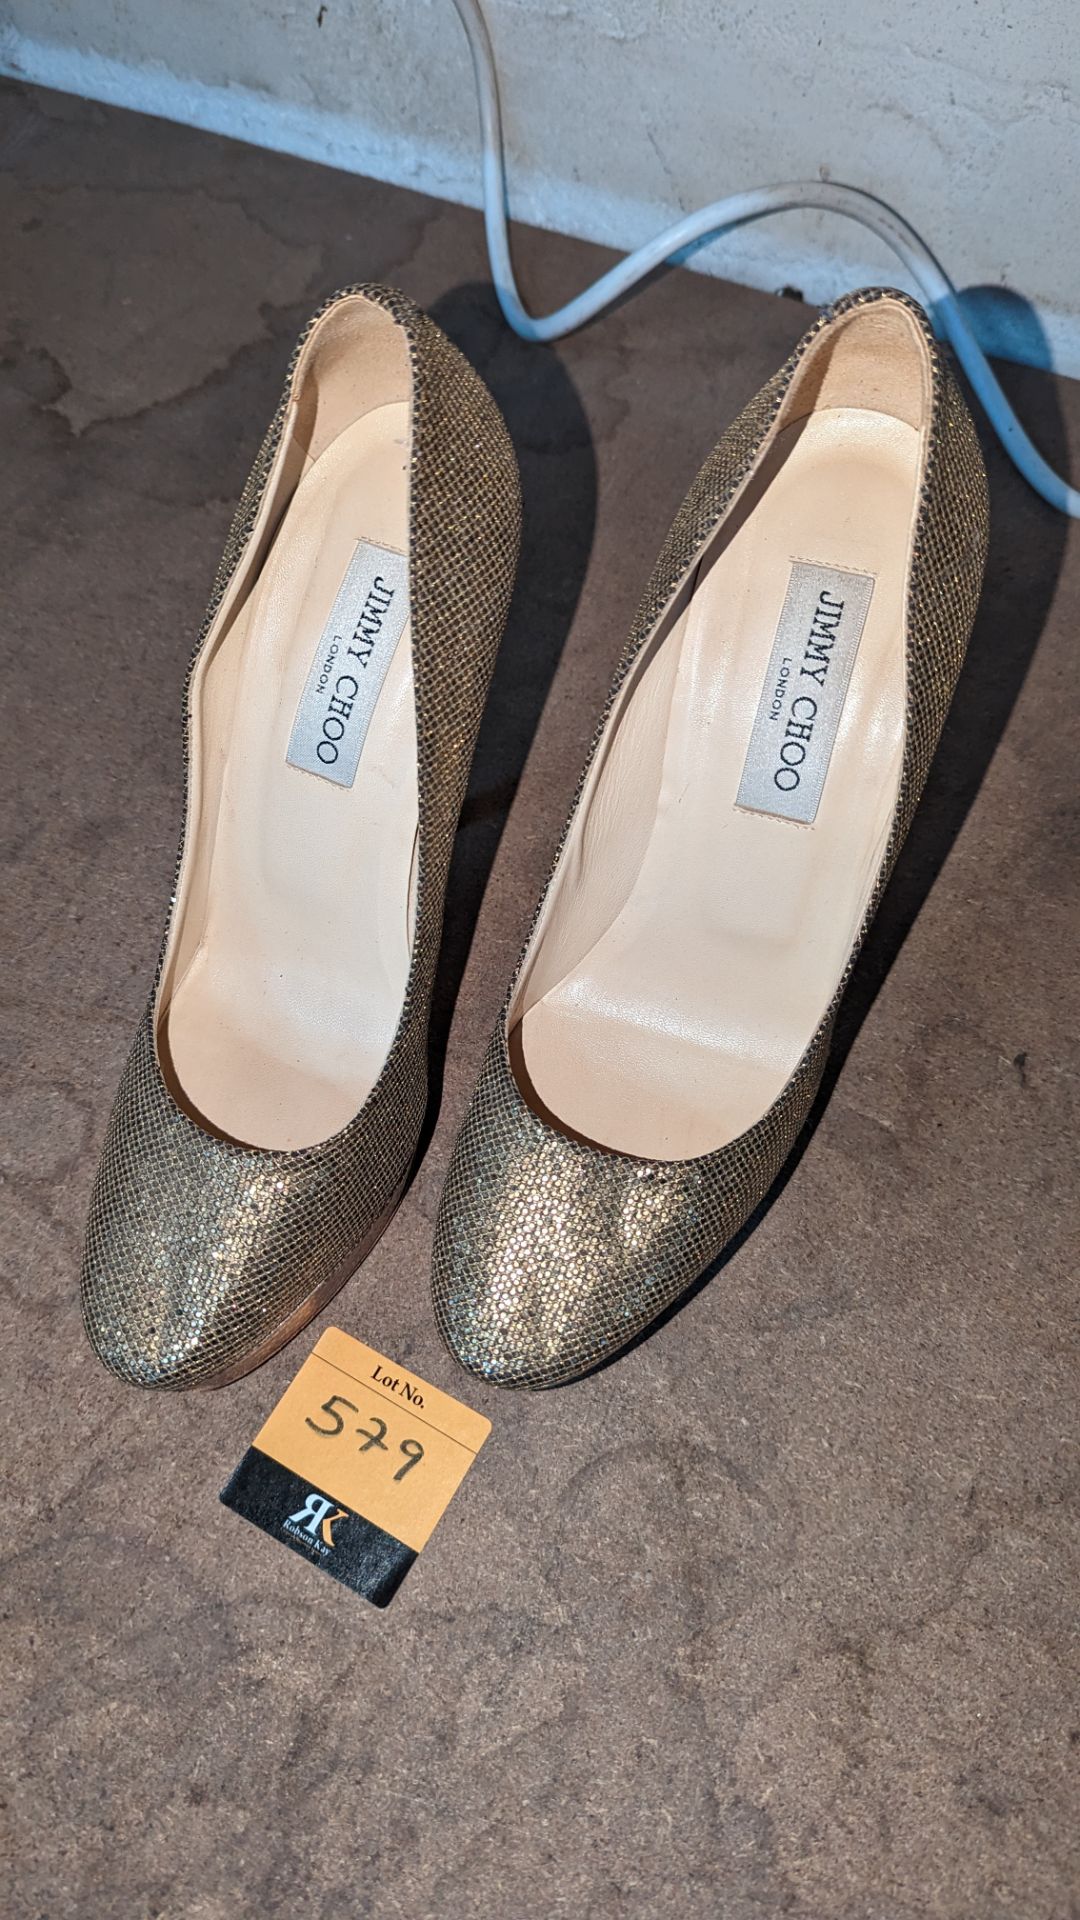 Pair of Jimmy Choo ladies shoes in gold, size 39 - Image 2 of 5